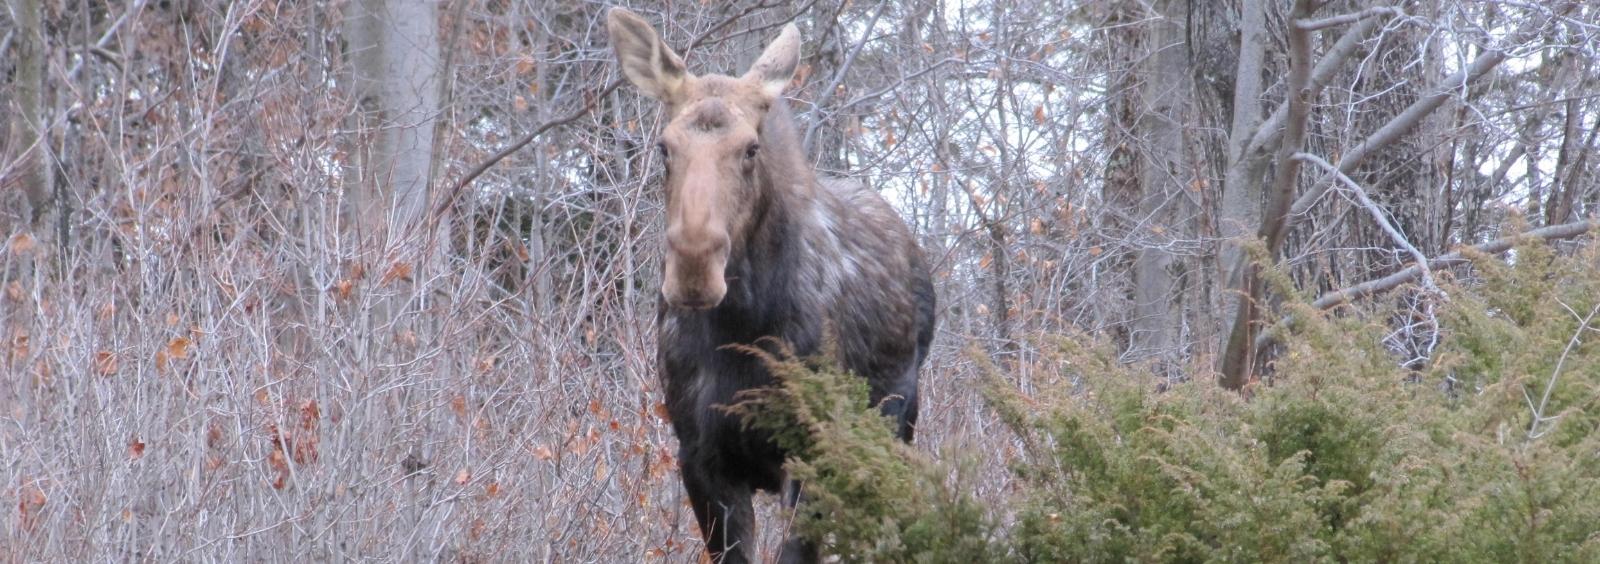 A moose looks at the camera through the bush.